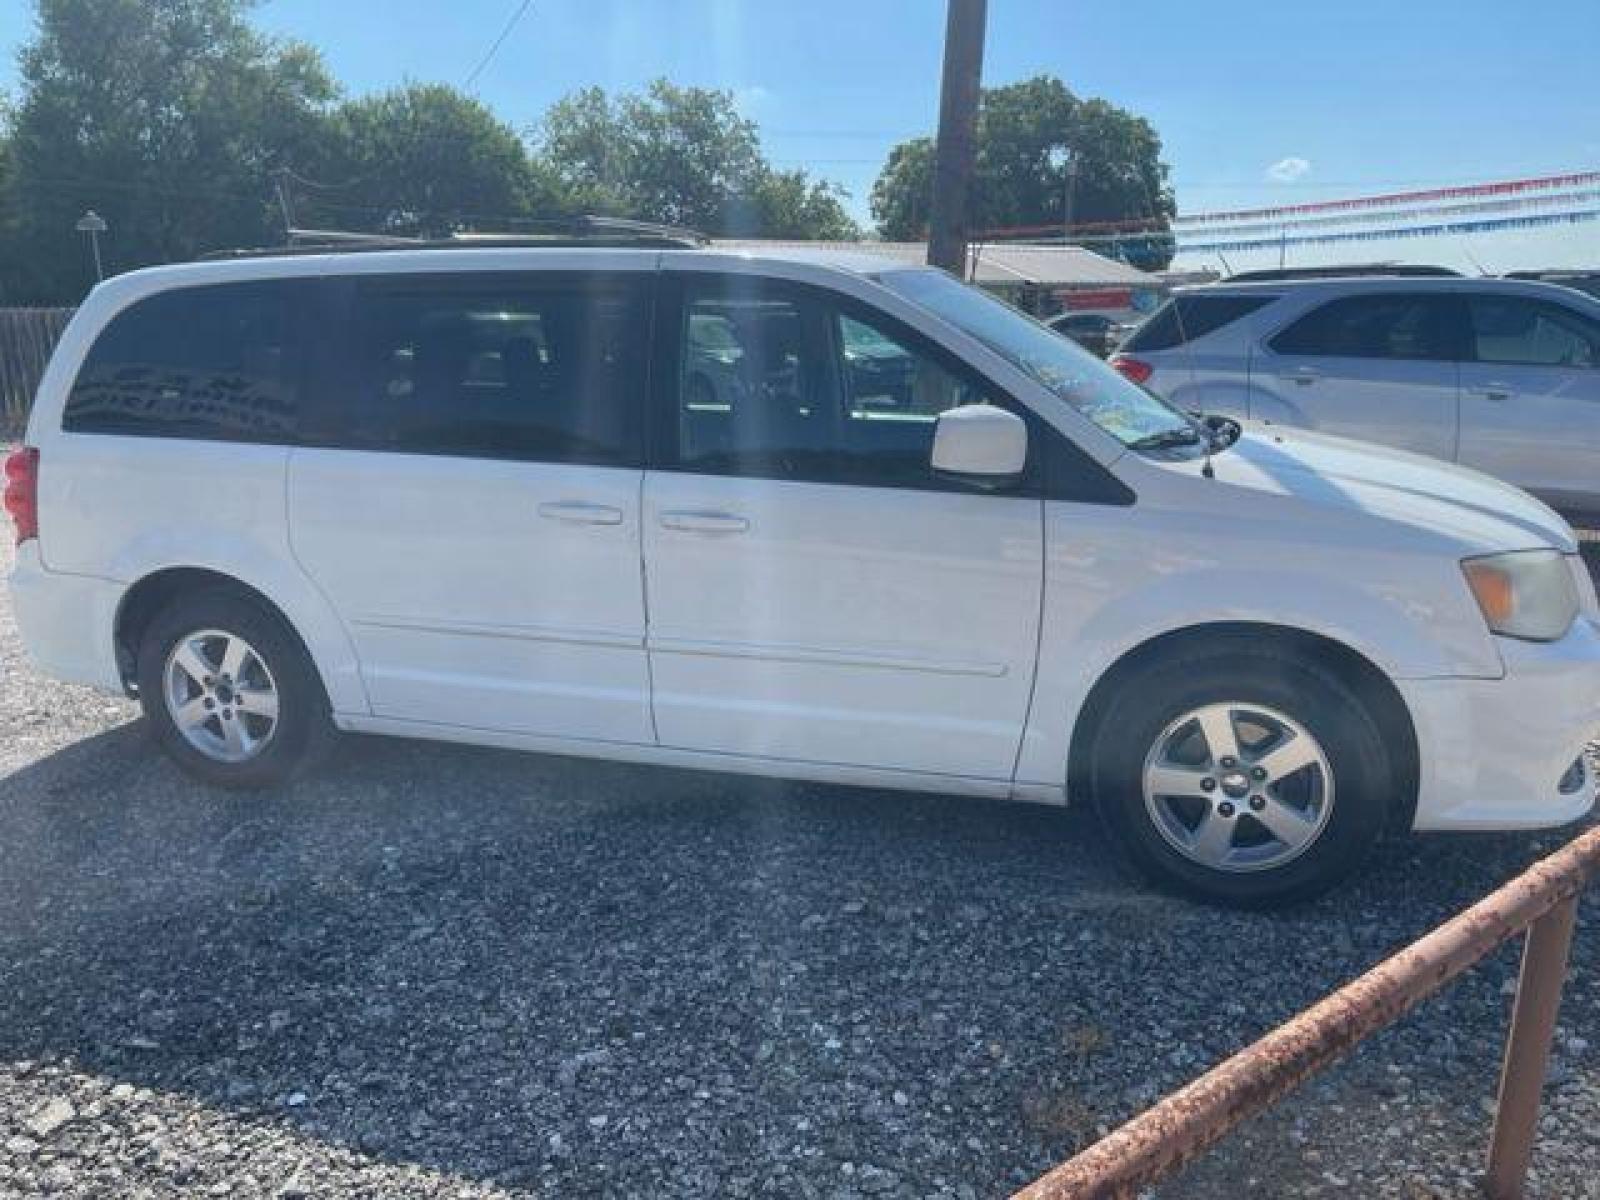 2013 WHITE DODGE GRAND CARAVAN SXT Stow n Go (2C4RDGCGXDR) with an 3.6L engine, Automatic transmission - www.discountautoscibolo.com TEXT QUESTIONS TO 210-900-3118 35 MONTHLY PAYMENTS OF $295 WITH $1895 DOWN AND FINAL ODD PAYMENT OF $273.90 W/FIRST PAYMENT DUE 30 DAYS FROM DATE OF SALE. FEATURES: STOW-N-GO,POWER SLIDING DOORS, 3RD ROW ** NO WARRANTY, SOLD AS IS ** 36 MO'S TERM - Photo #7